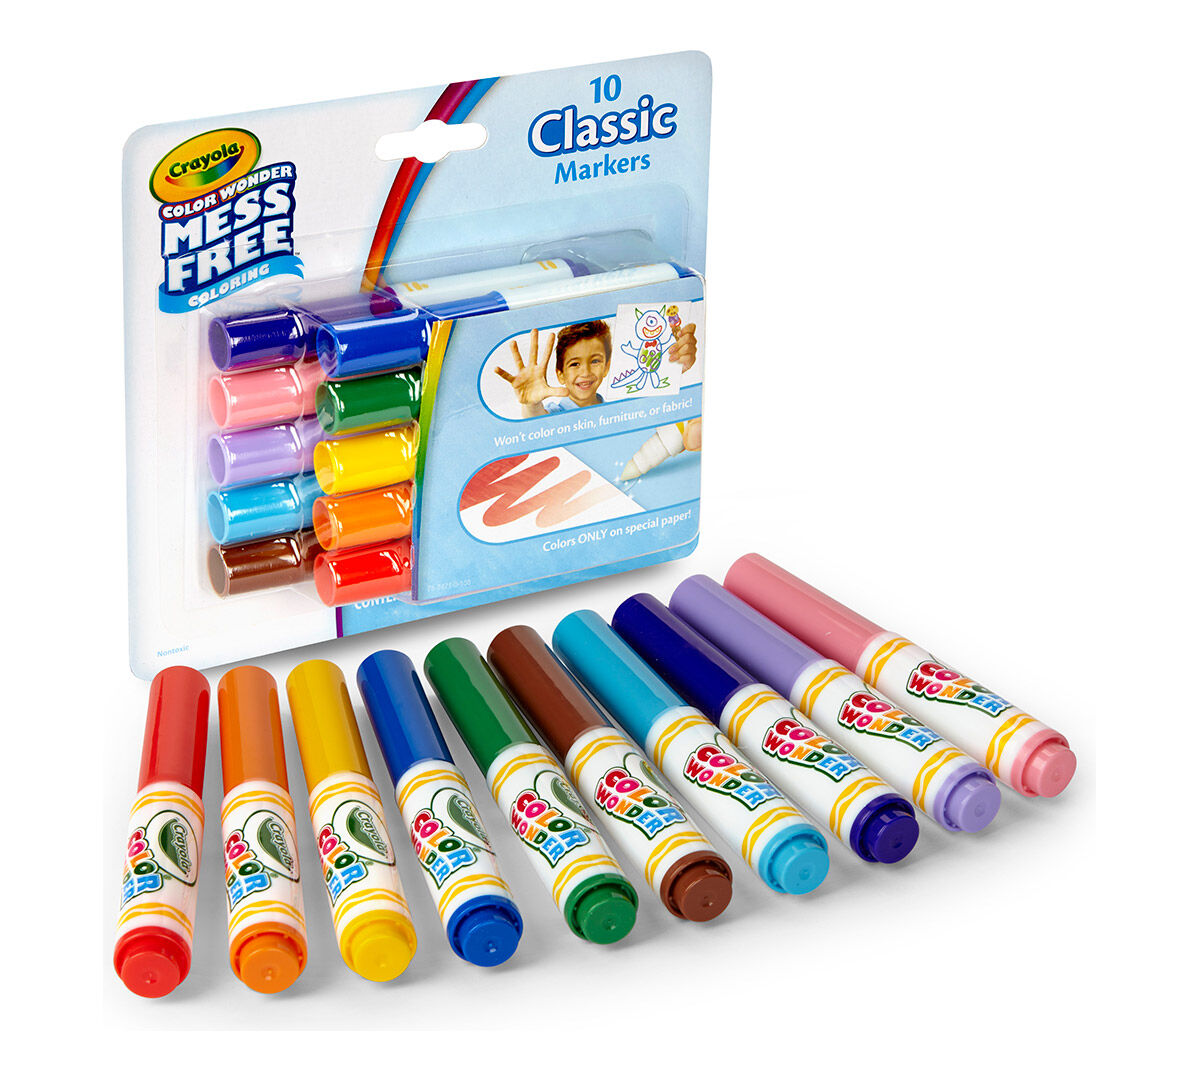 Choose your model Crayola Color Wonder Markers Papers & Paint! Mess Free 